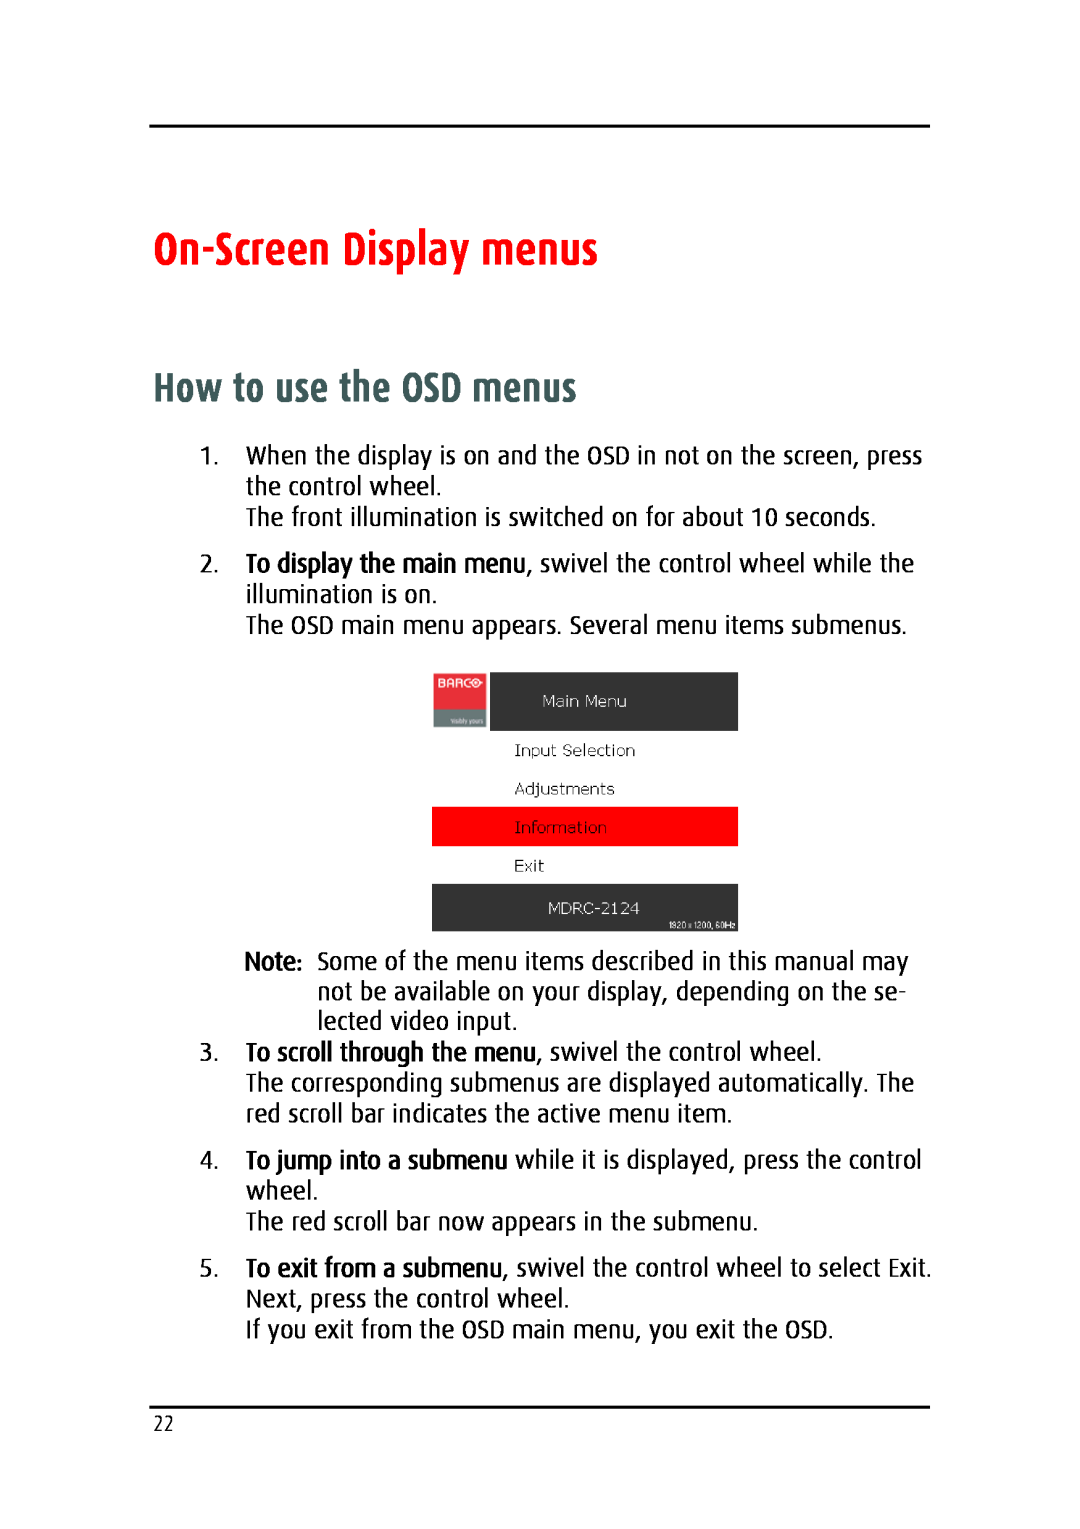 Barco MDRC-2124 user manual On-Screen Display menus, How to use the OSD menus 